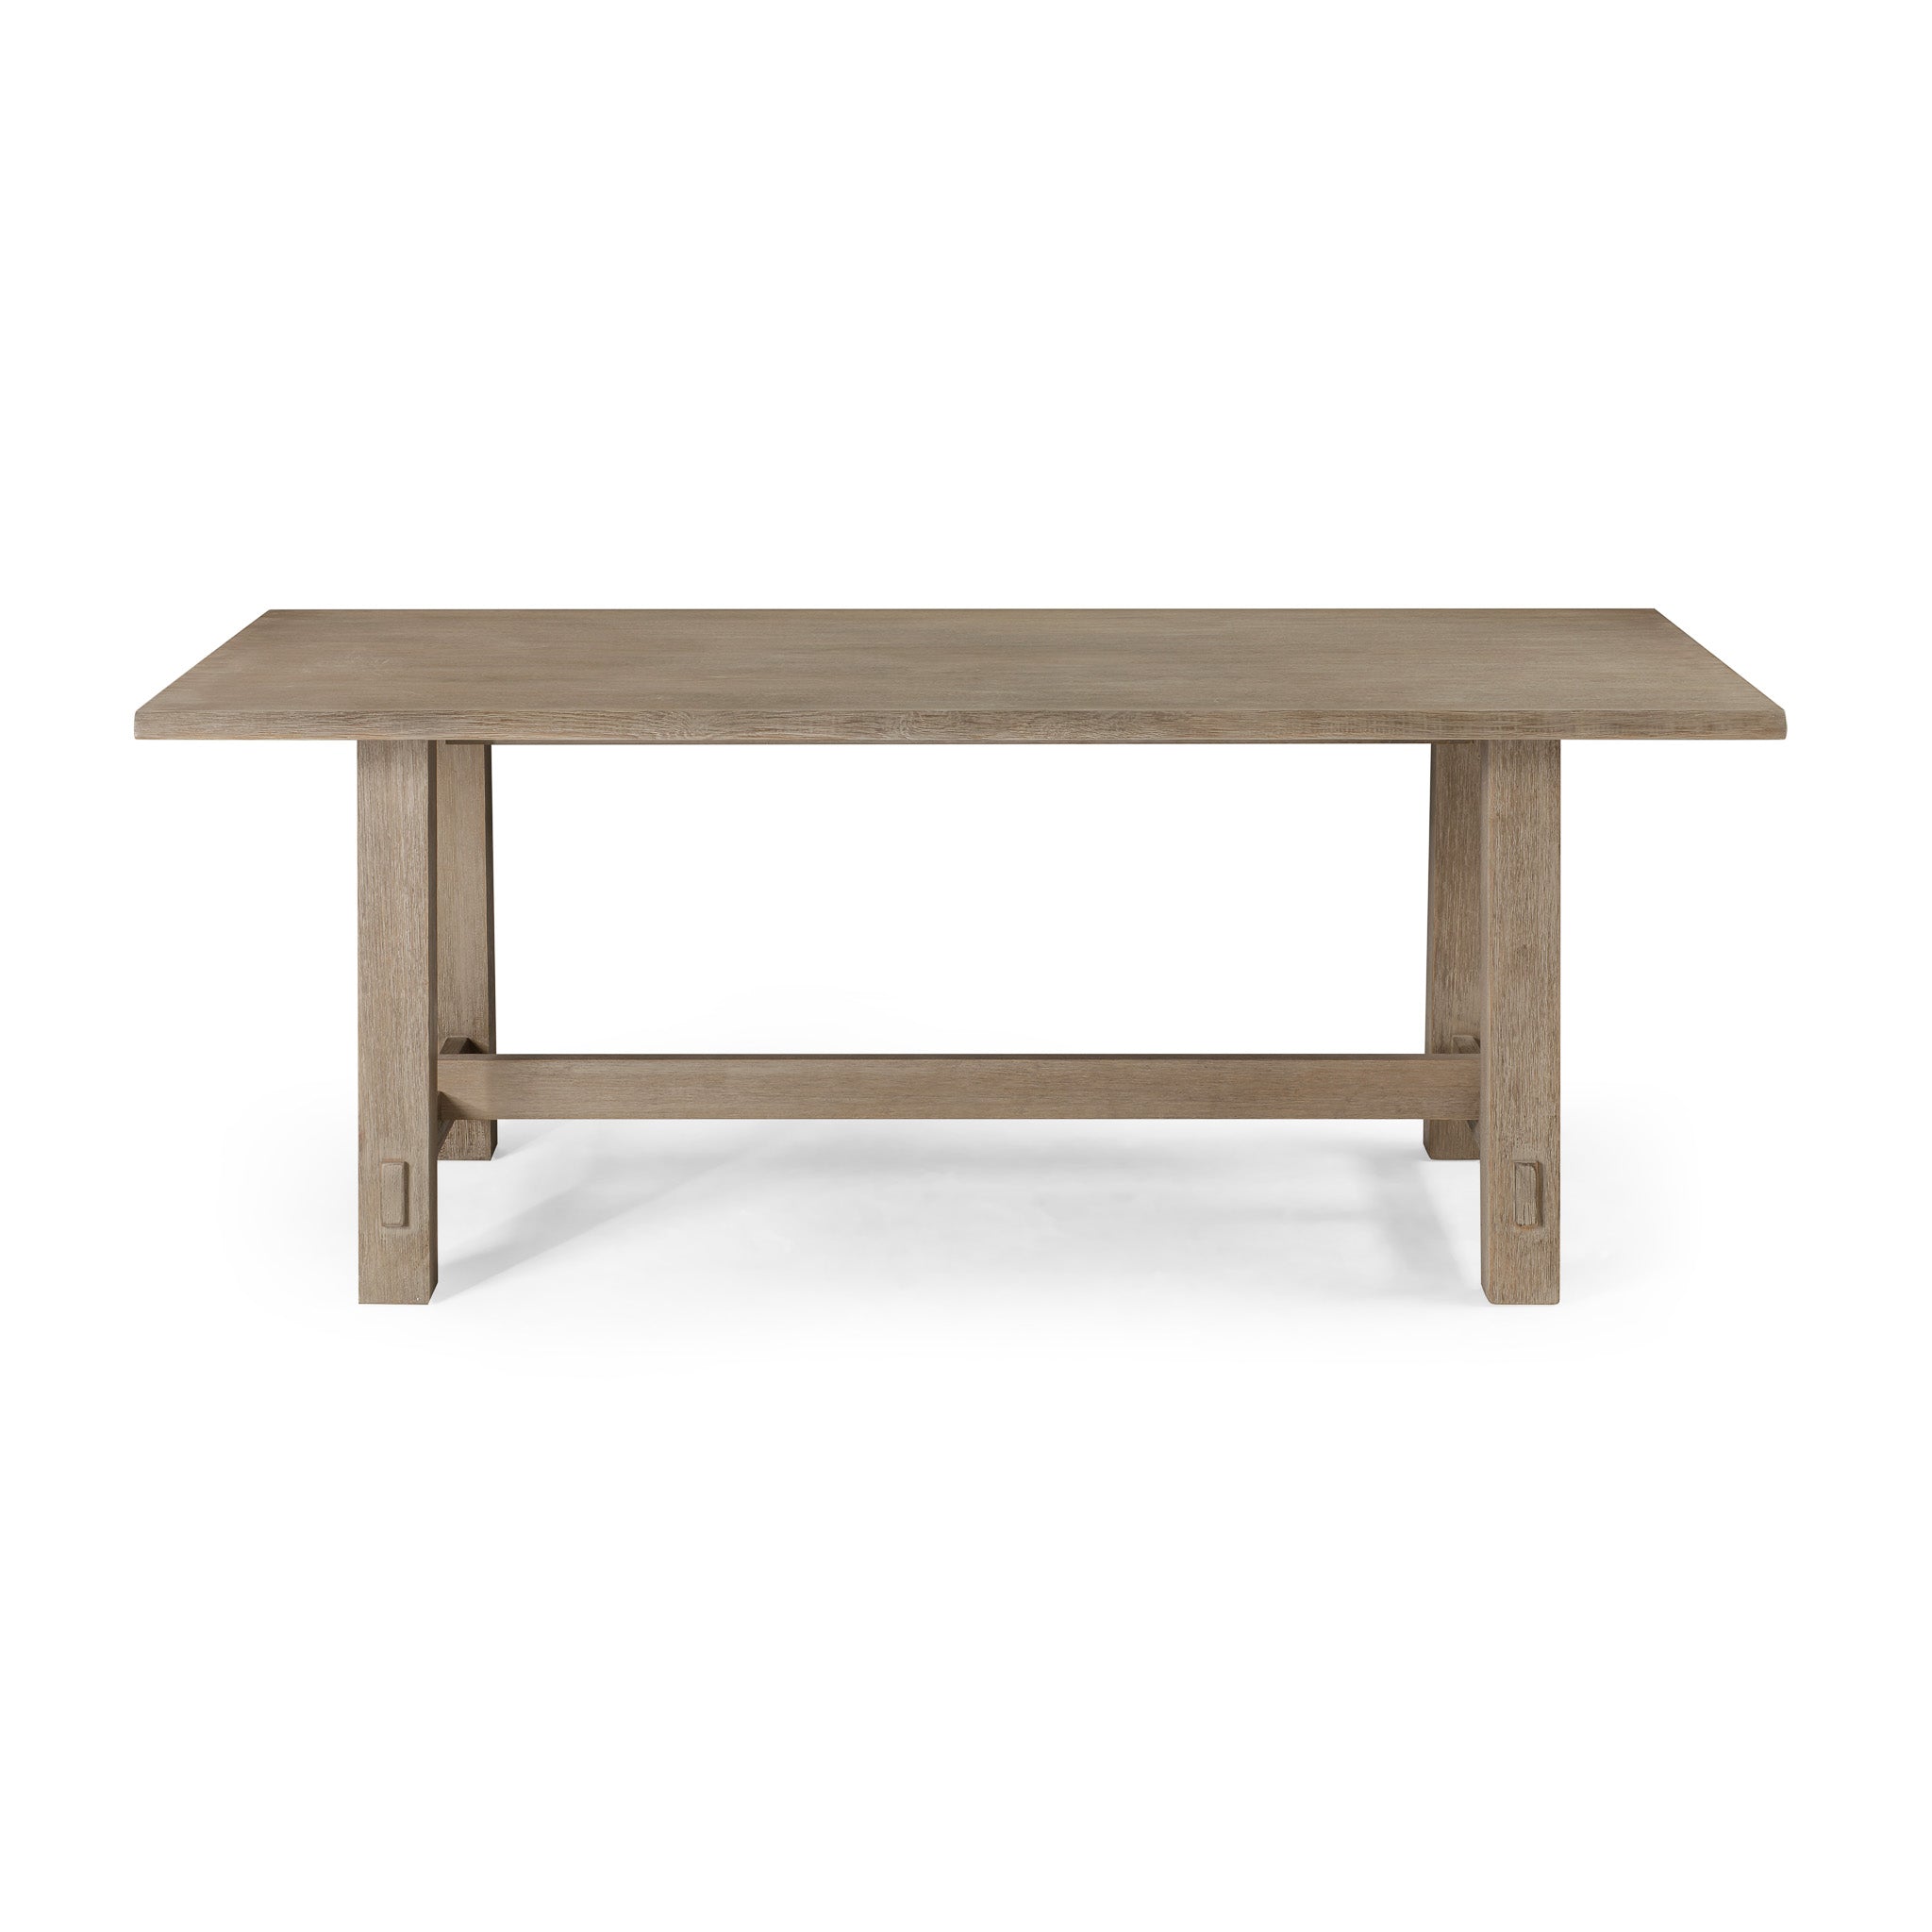 Yves Organic Rectangular Wooden Dining Table in Weathered Grey Finish in Dining Furniture by Maven Lane